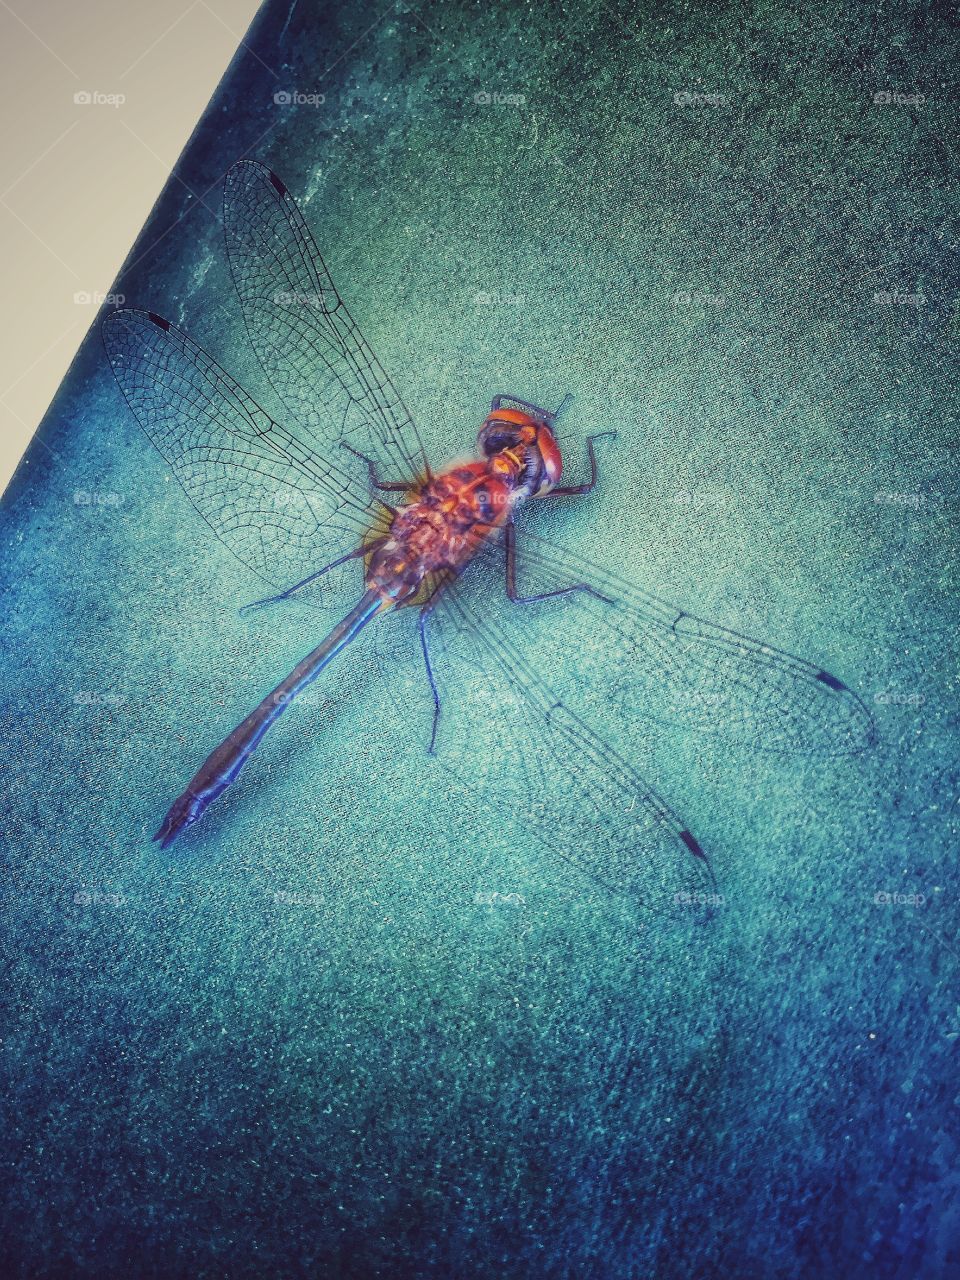 Dragonfly.. You can call me friend.